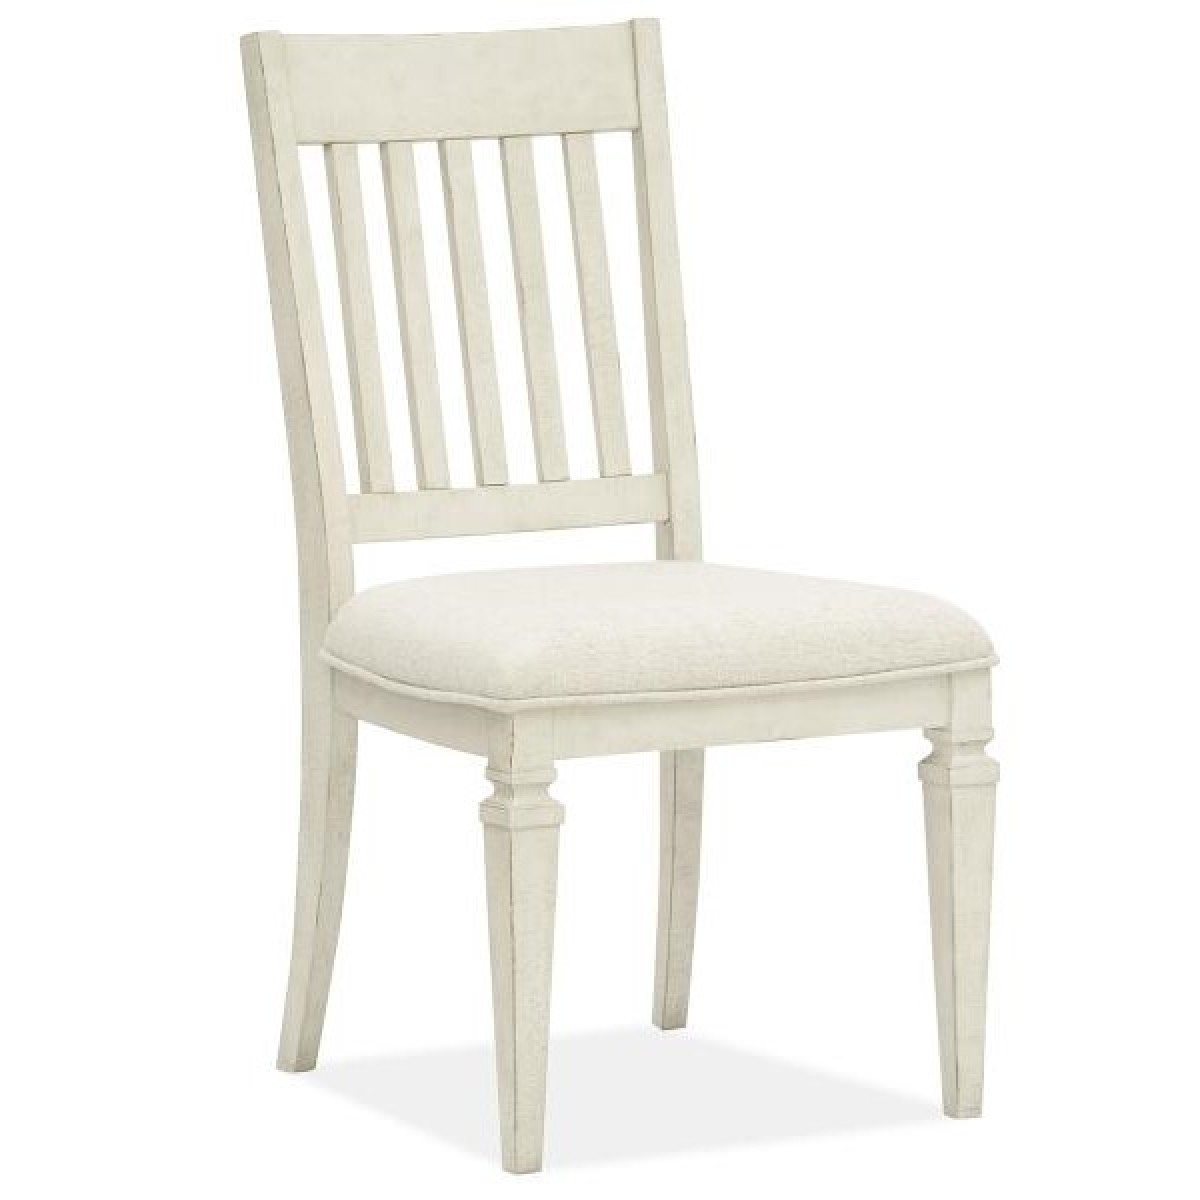 Newport Dining Side Chair with Upholstered Seat